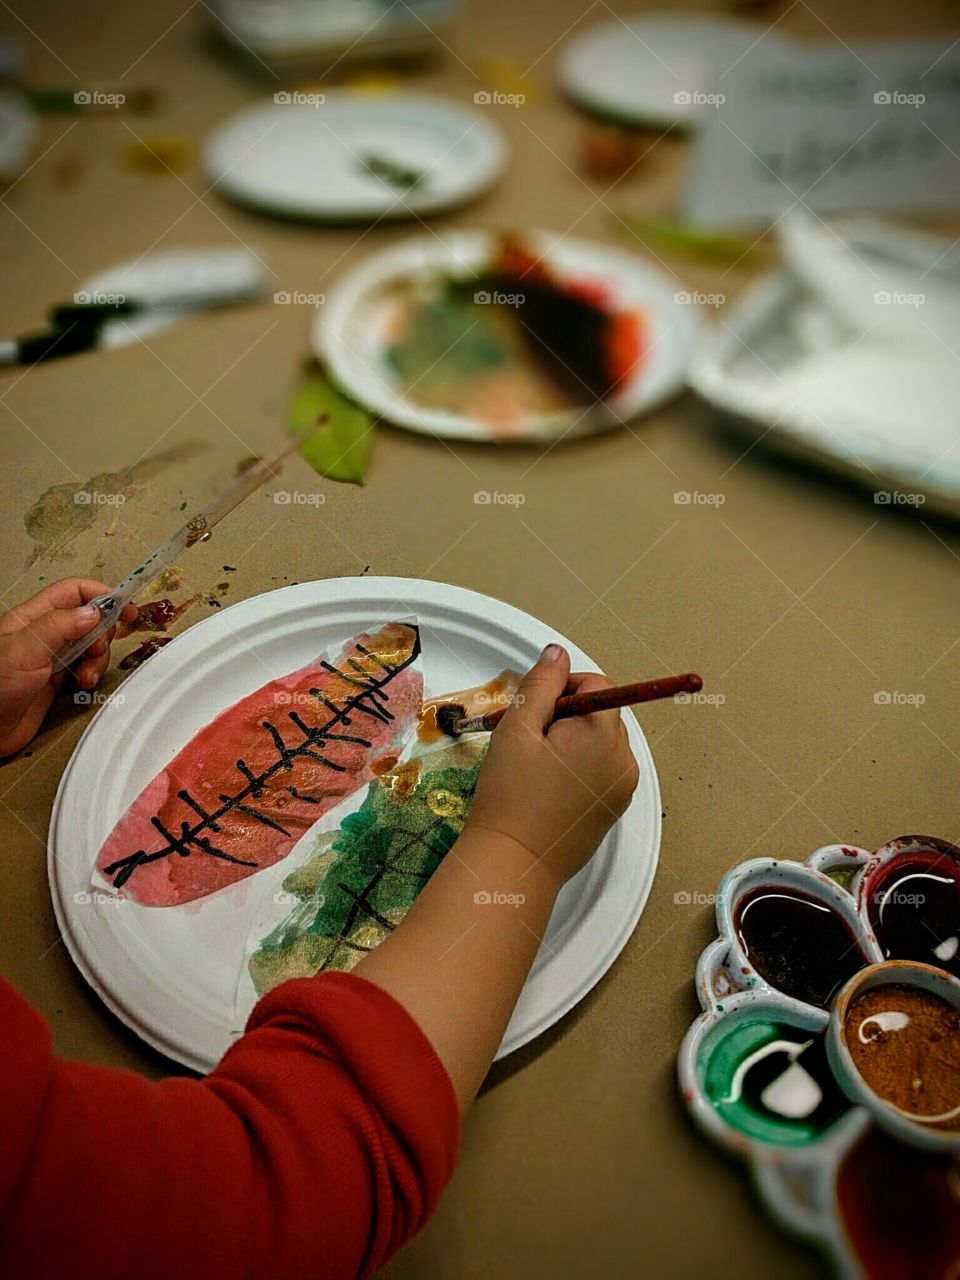 A small child paints autumn leaves